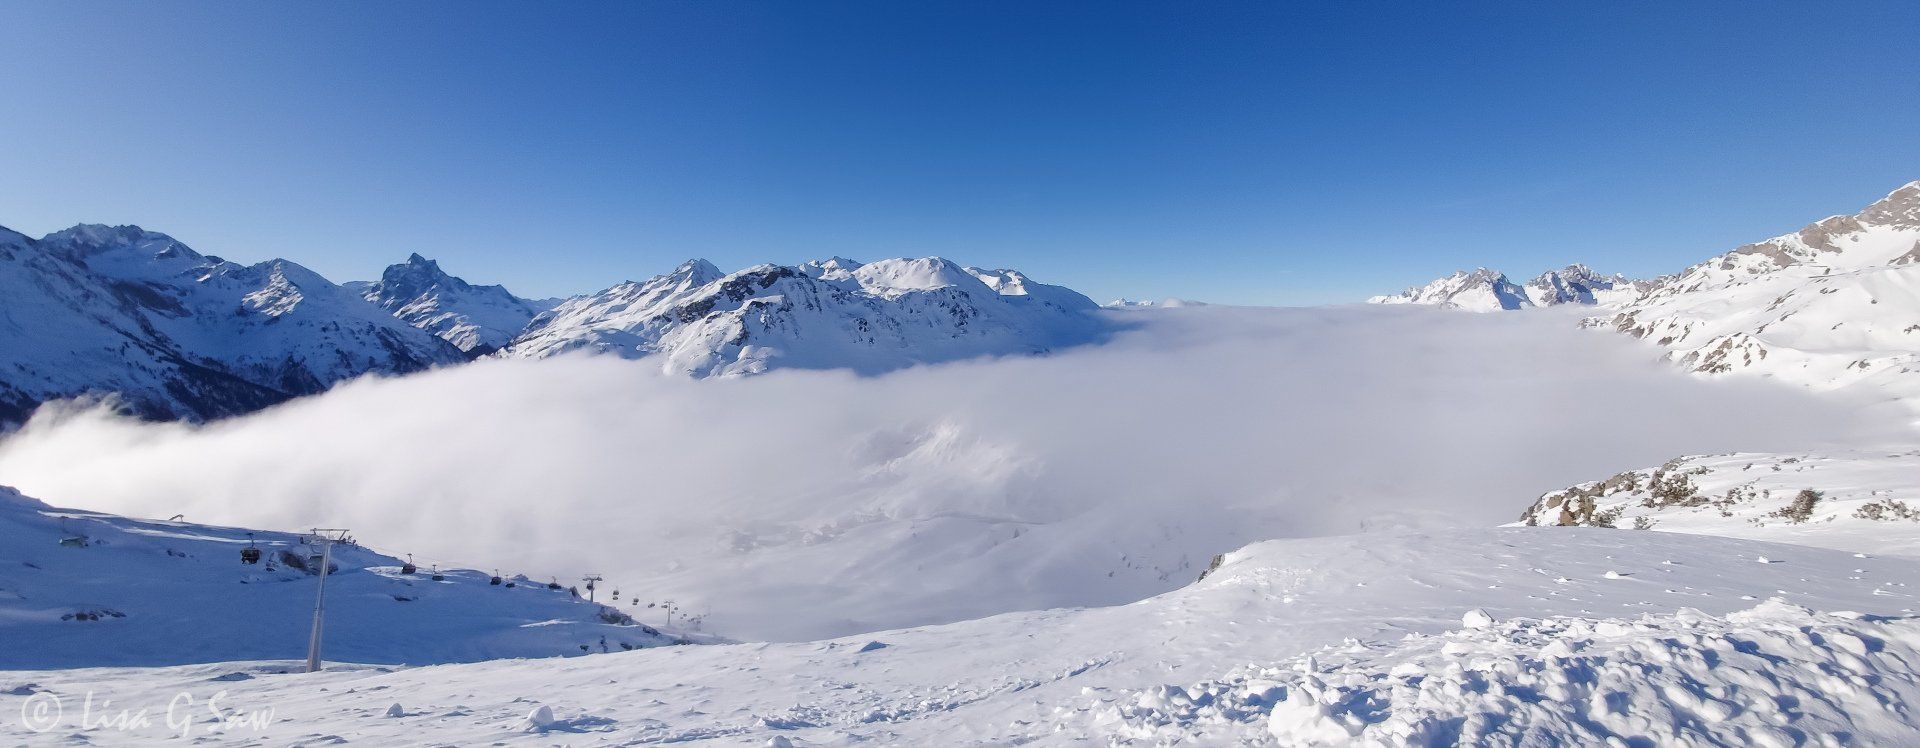 Ski resort and snow covered mountains with low cloud